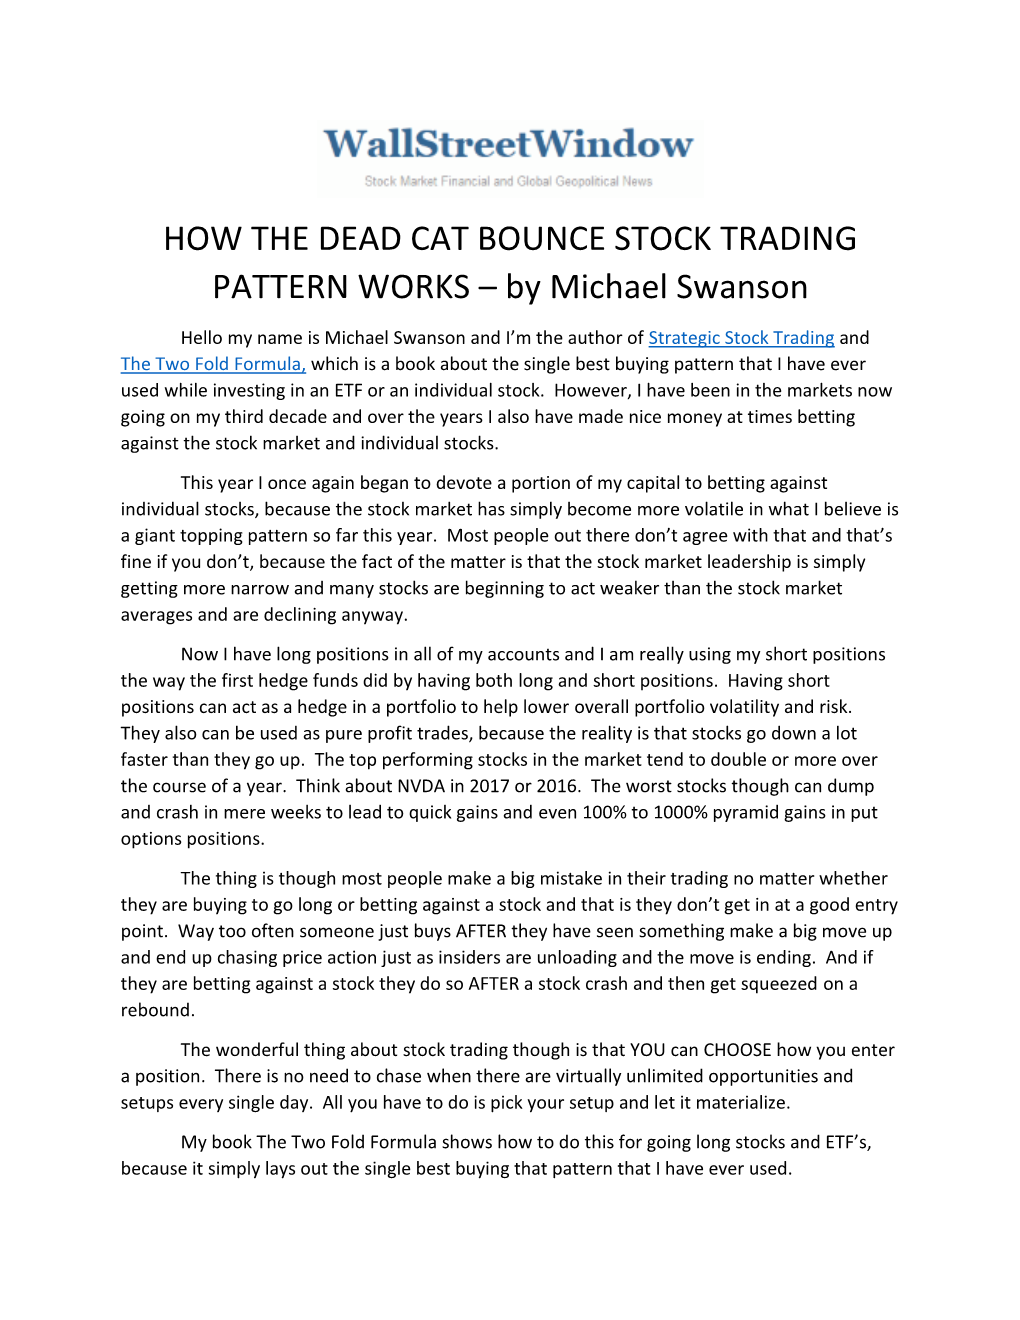 HOW the DEAD CAT BOUNCE STOCK TRADING PATTERN WORKS – by Michael Swanson